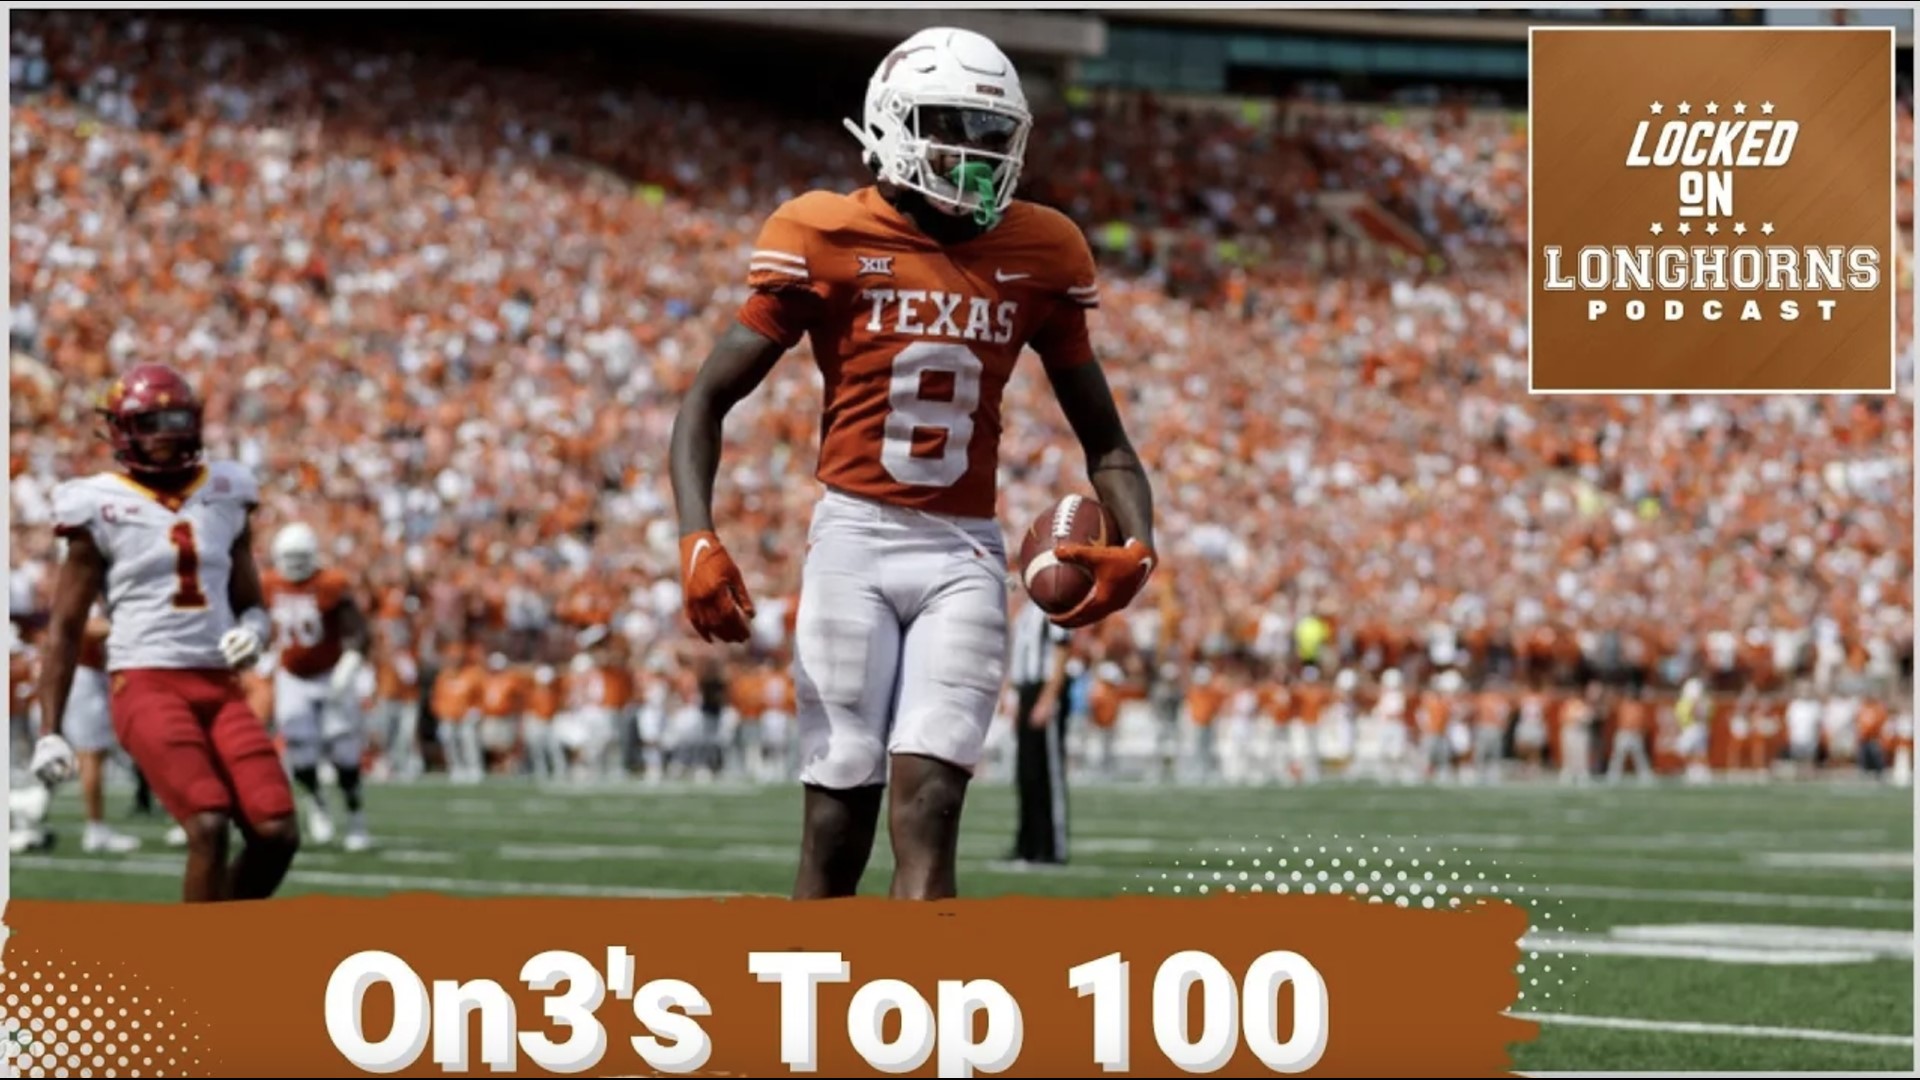 According to Urban Meyer, the Texas Longhorns Football Team has the most talented roster in college football.